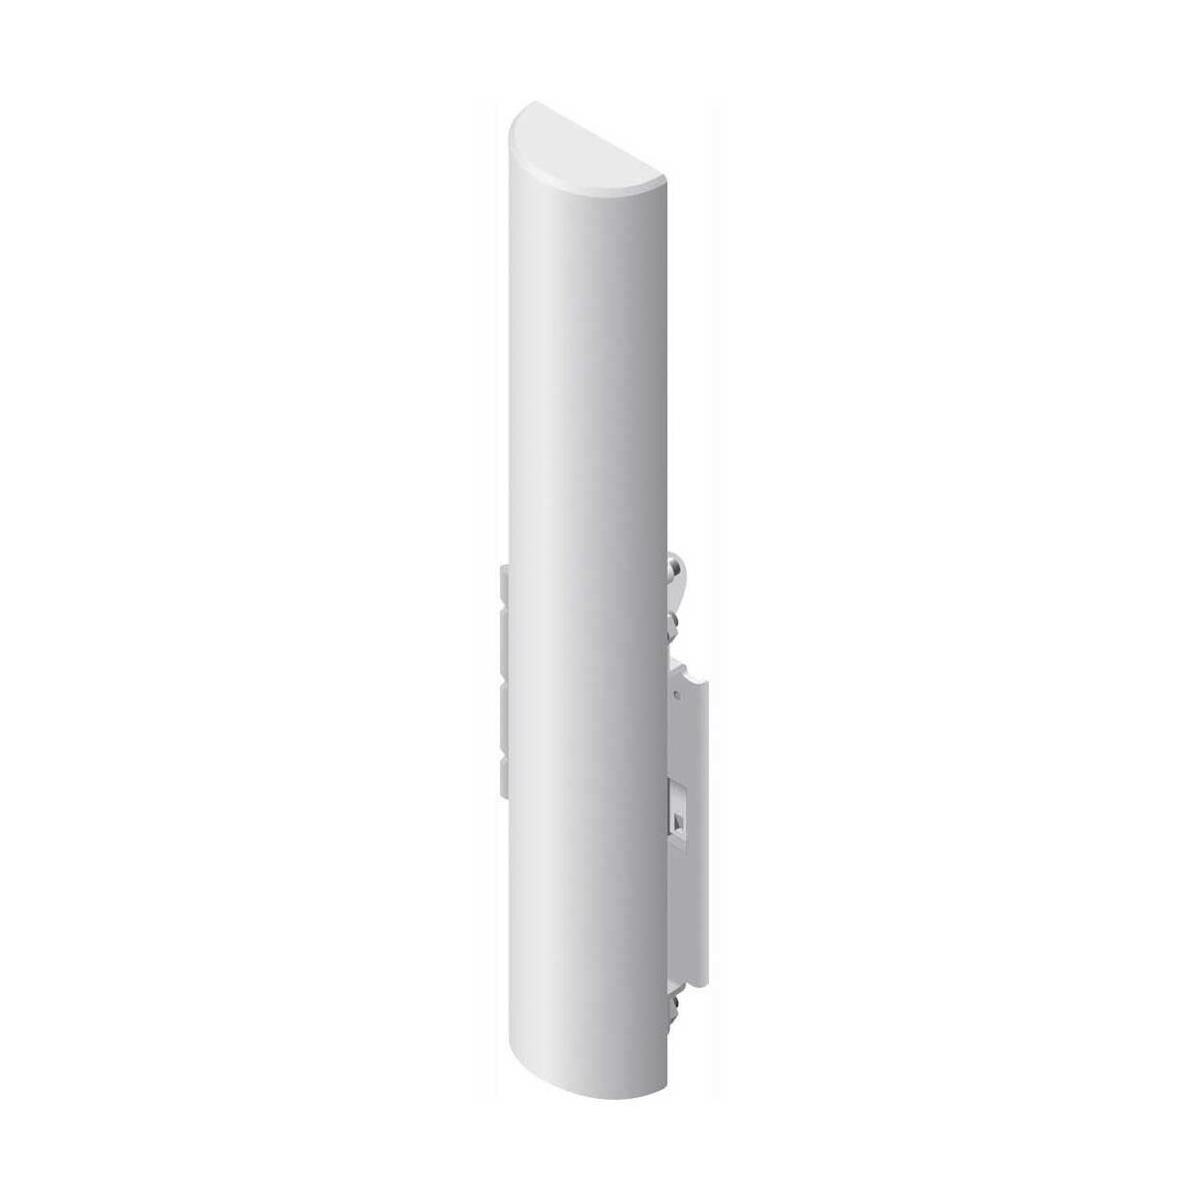 Ubiquiti Networks airMAX 2x2 MIMO Sector Antenna, 16.1-17.1dBi, 4.90-5.85GHz